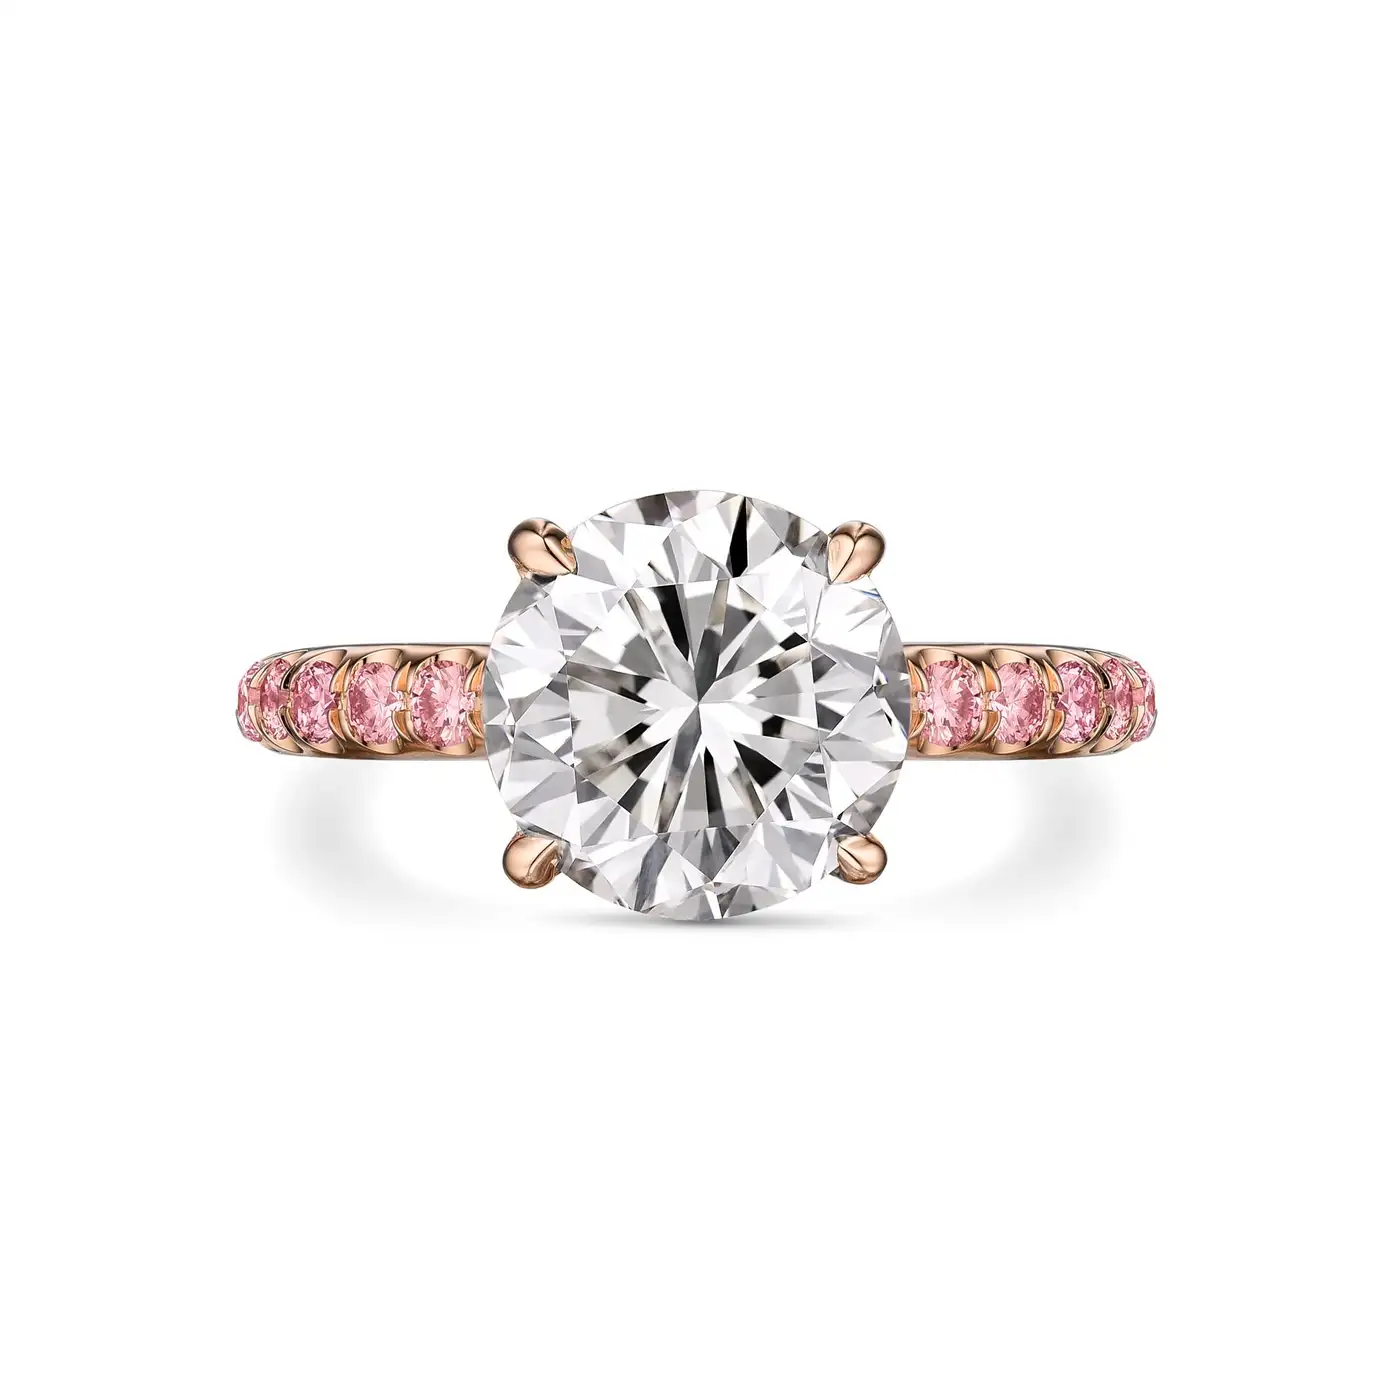 Brilliant-Round-Engagement-Ring-with-Pink-Diamonds-GIA-Certified-3.01-Carat-6.webp